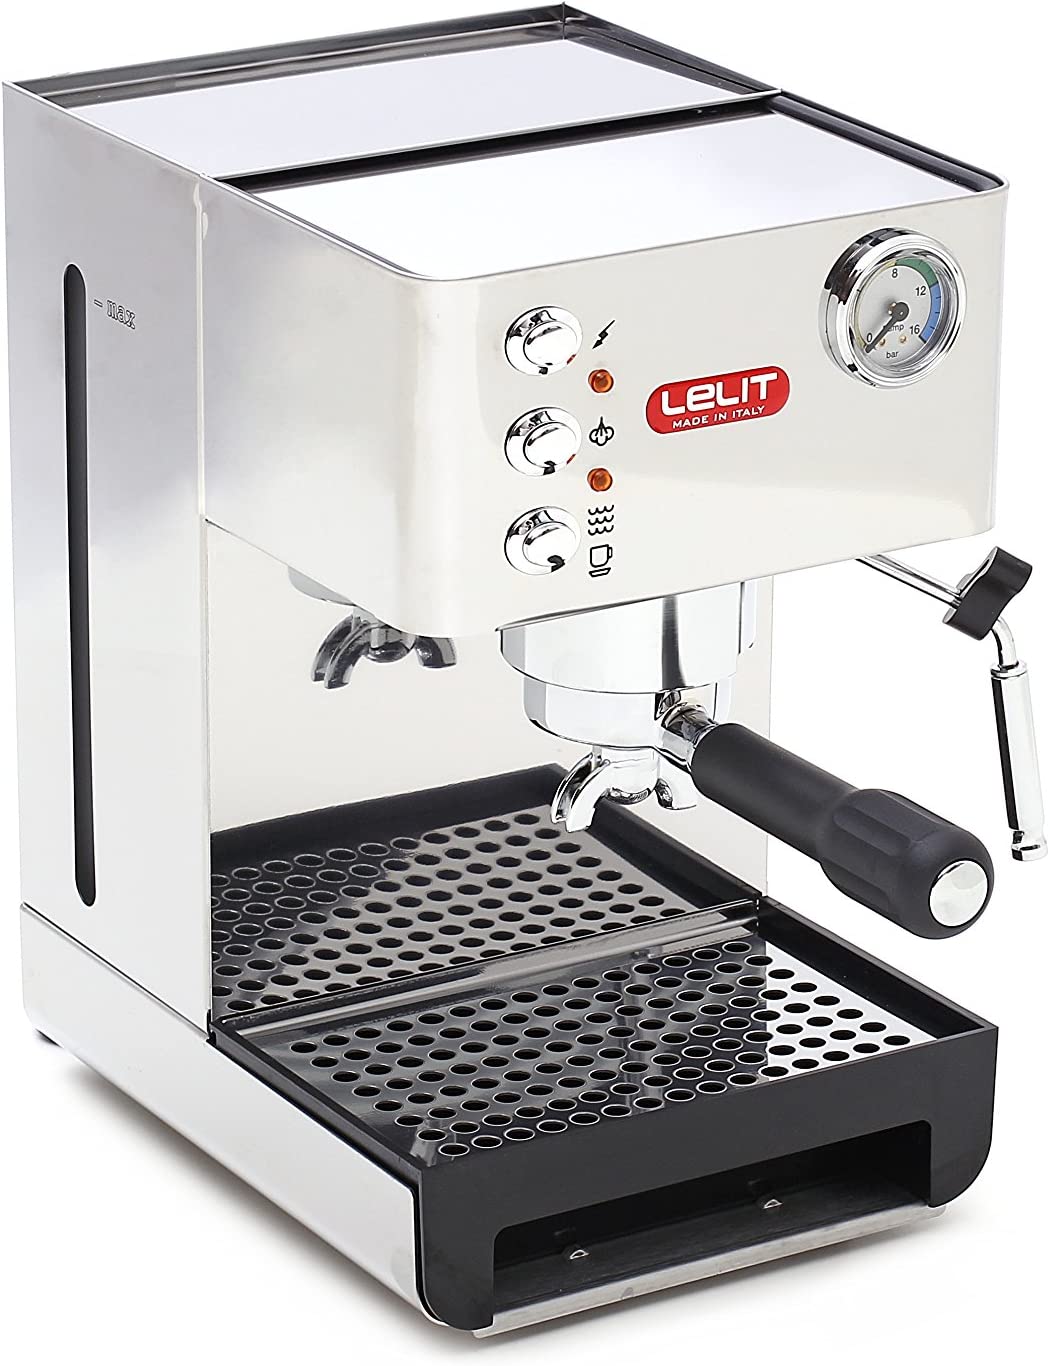 Lelit Anna Pl41em Semi Professional Coffee Machine, Ideal for Espresso Cover, Cappuccino and Coffee Pads, Stainless Steel, 2.7 Lites, Stainless Steel